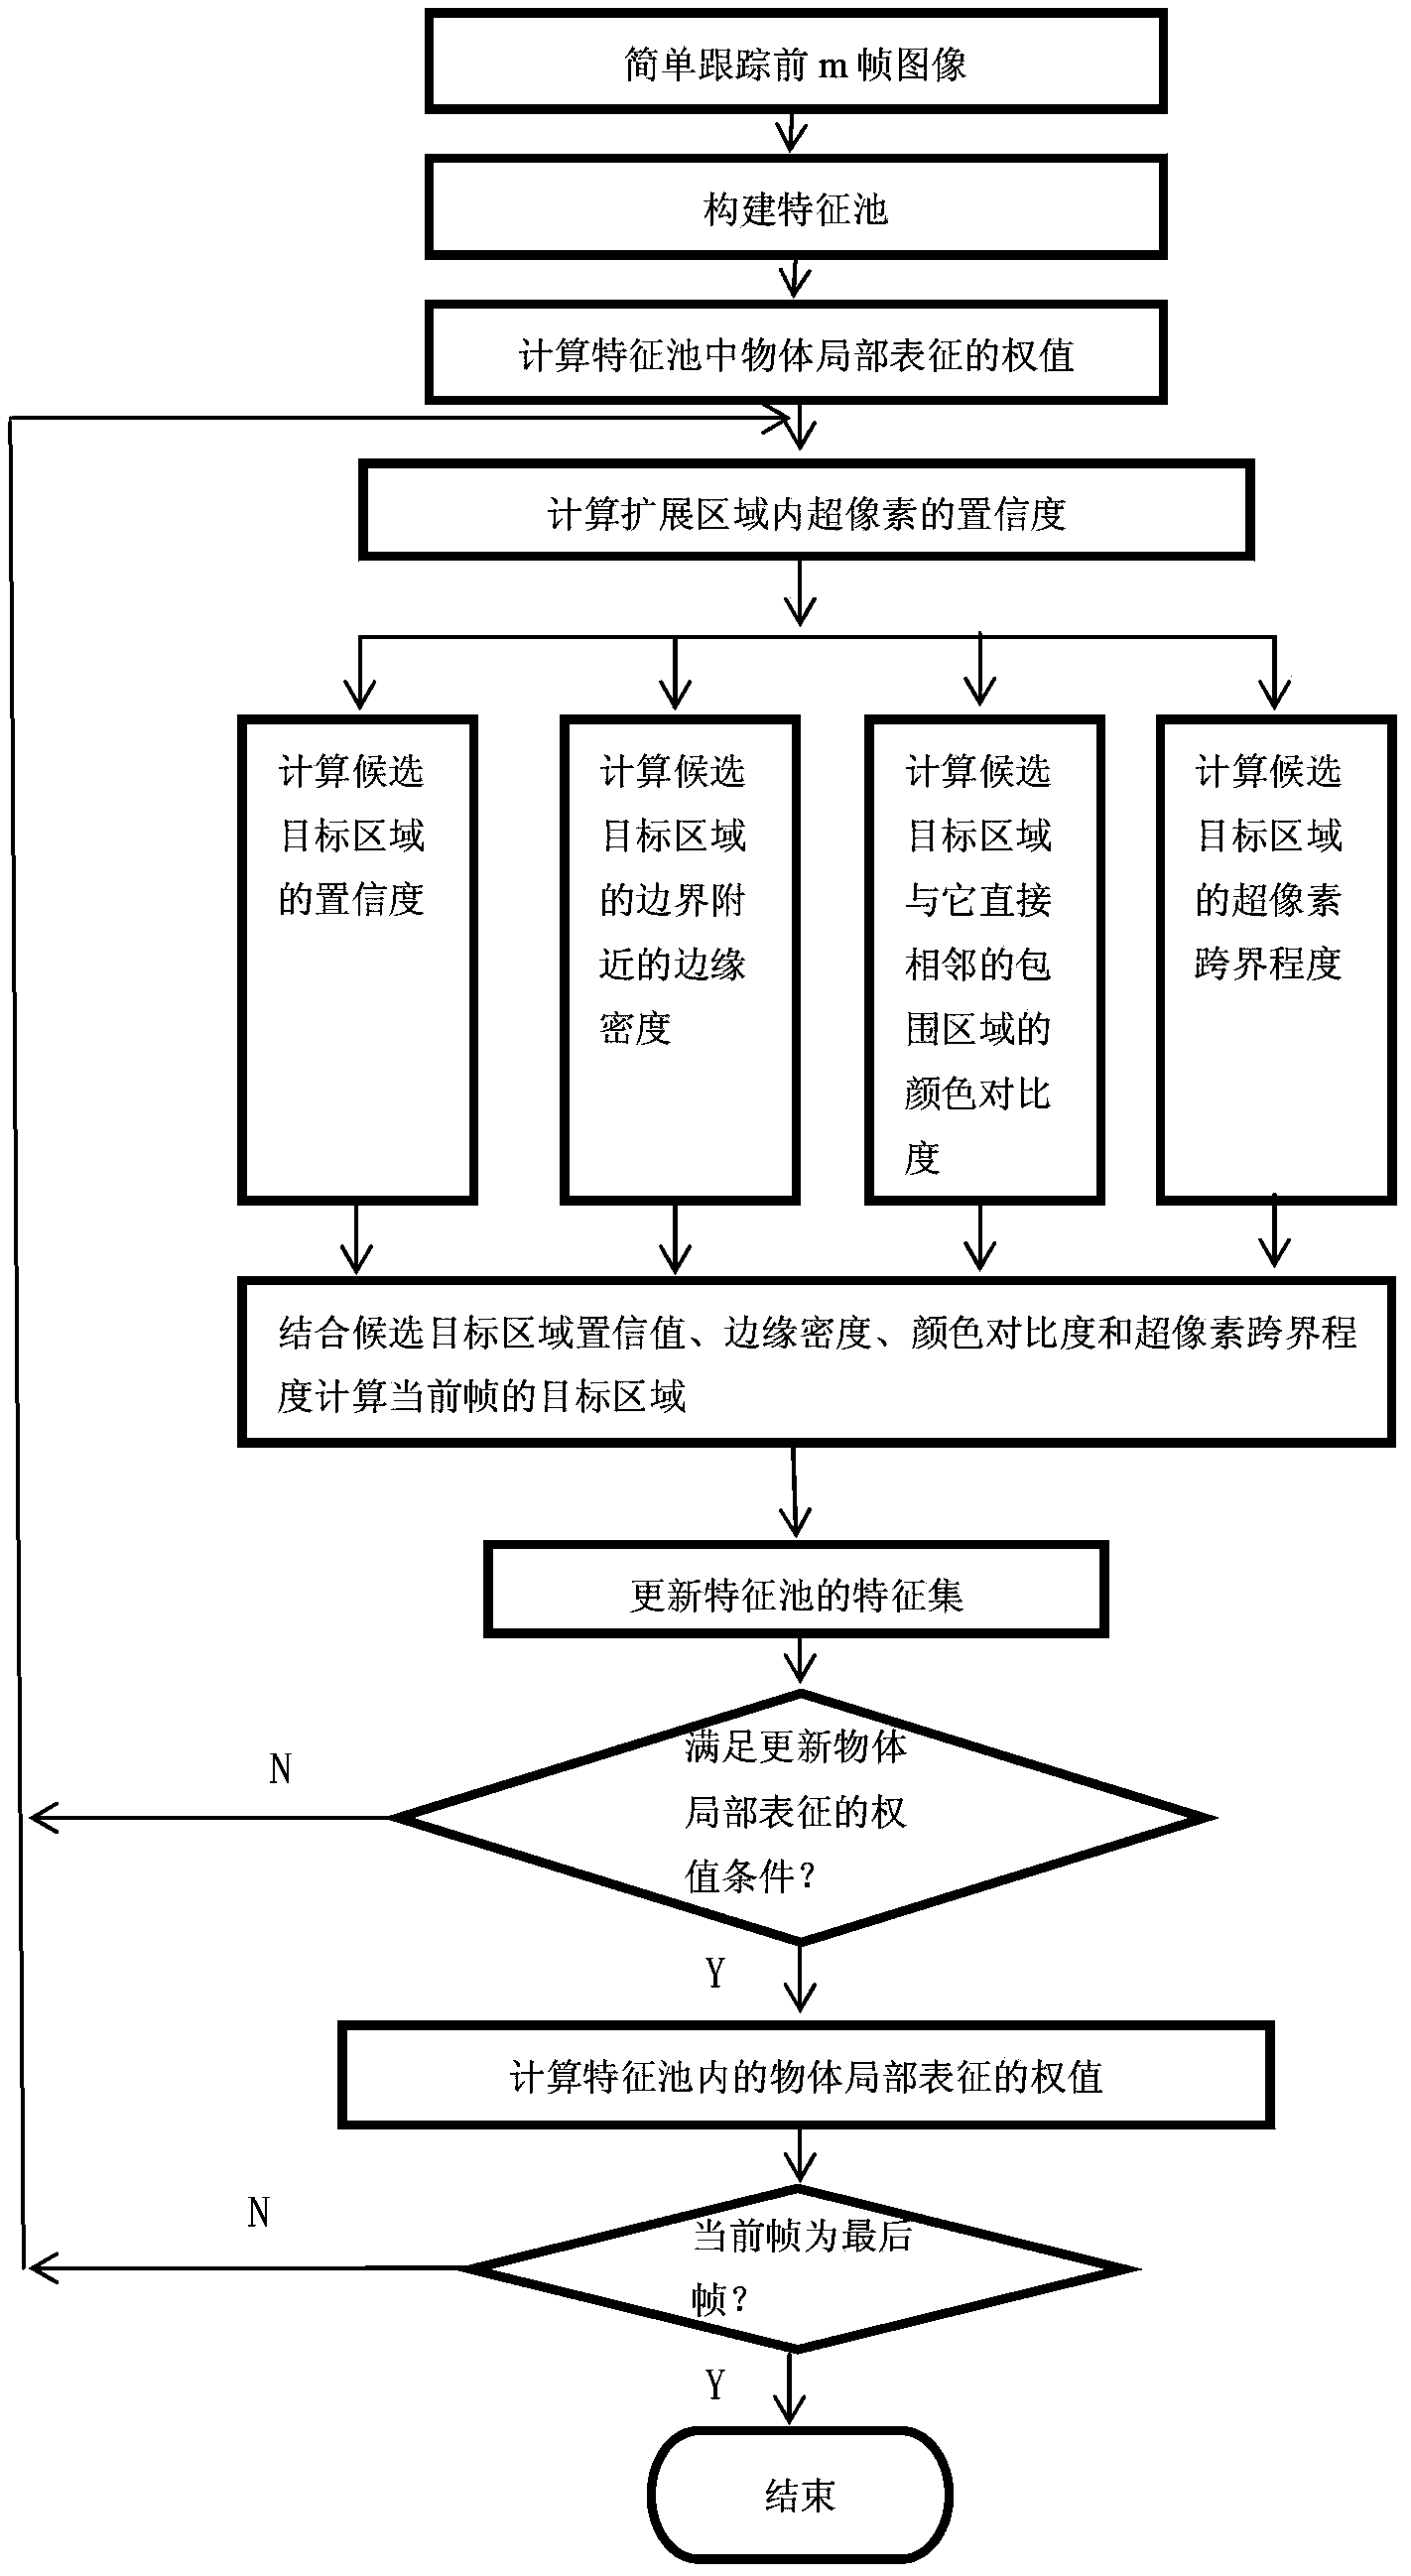 Tracking method based on integral and partial recognition of object